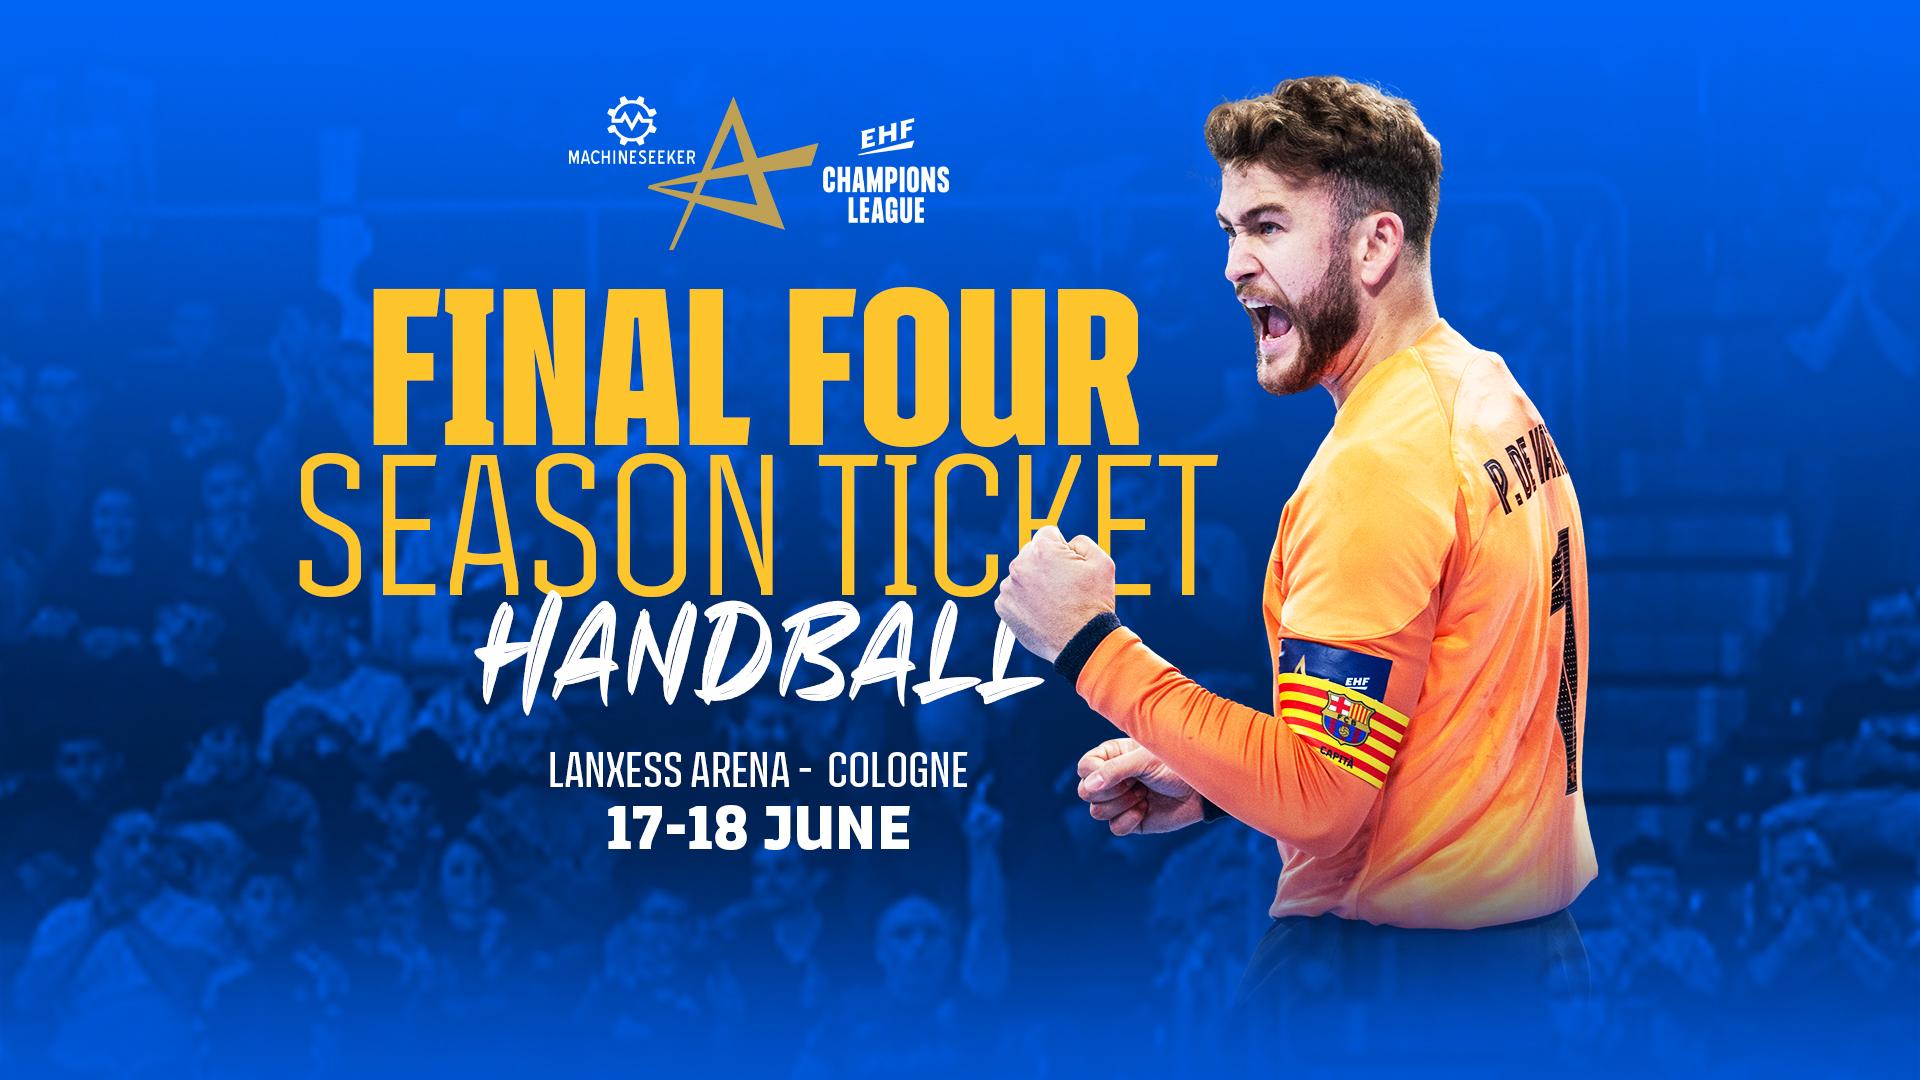 Sale of ticket packages for the handball Final Four in Cologne